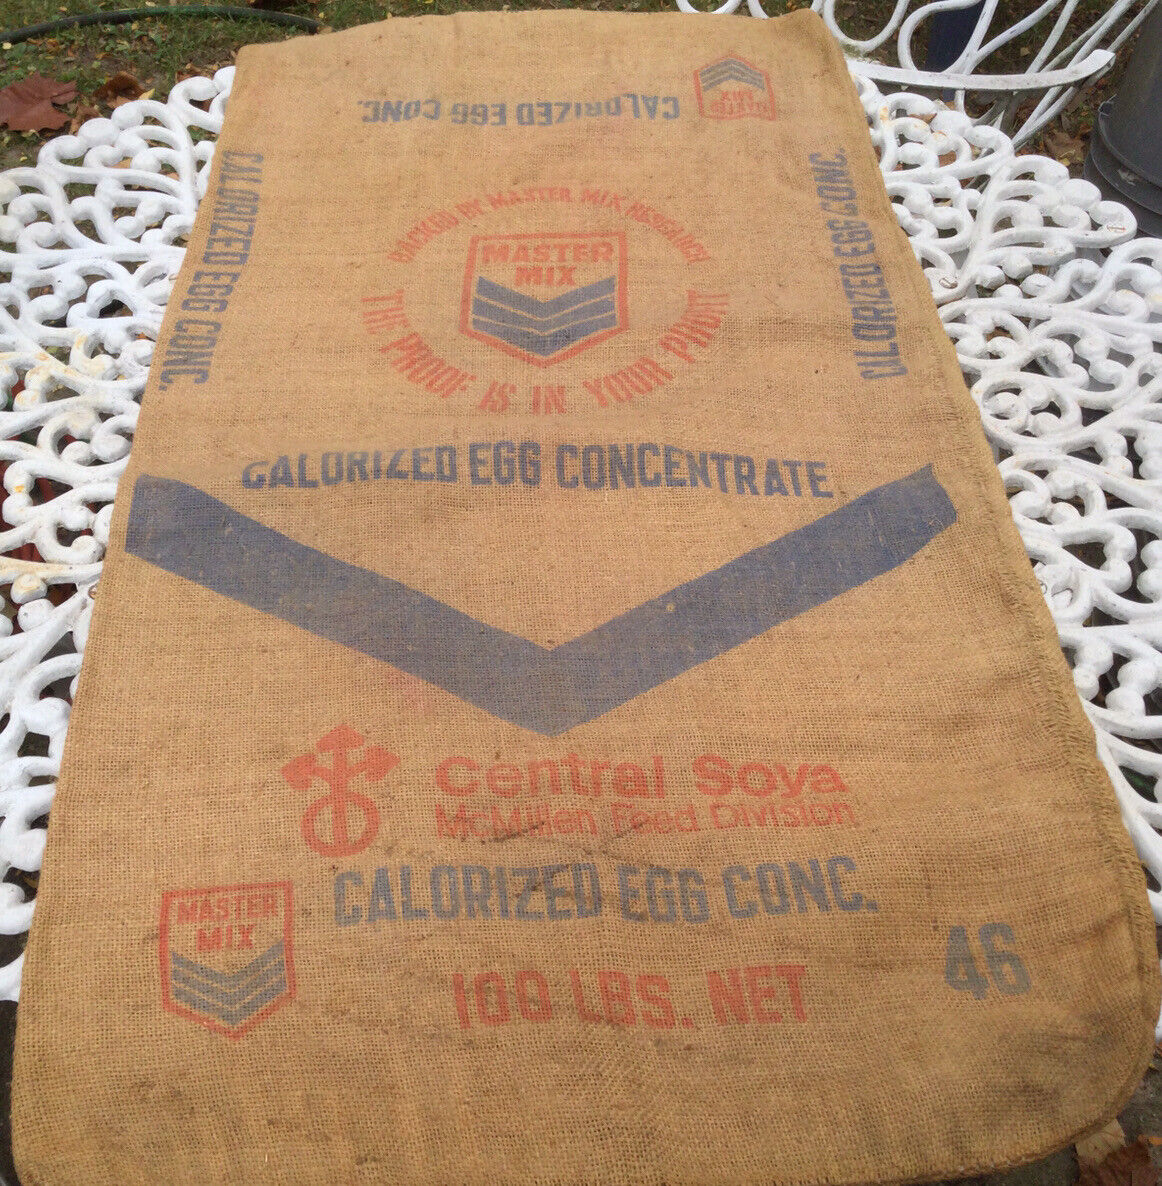 VTG BURLAP ADV SEED FEED SACK BAG MASTER MIX CALORIZED EGG CONCENTRATE 2 Sided